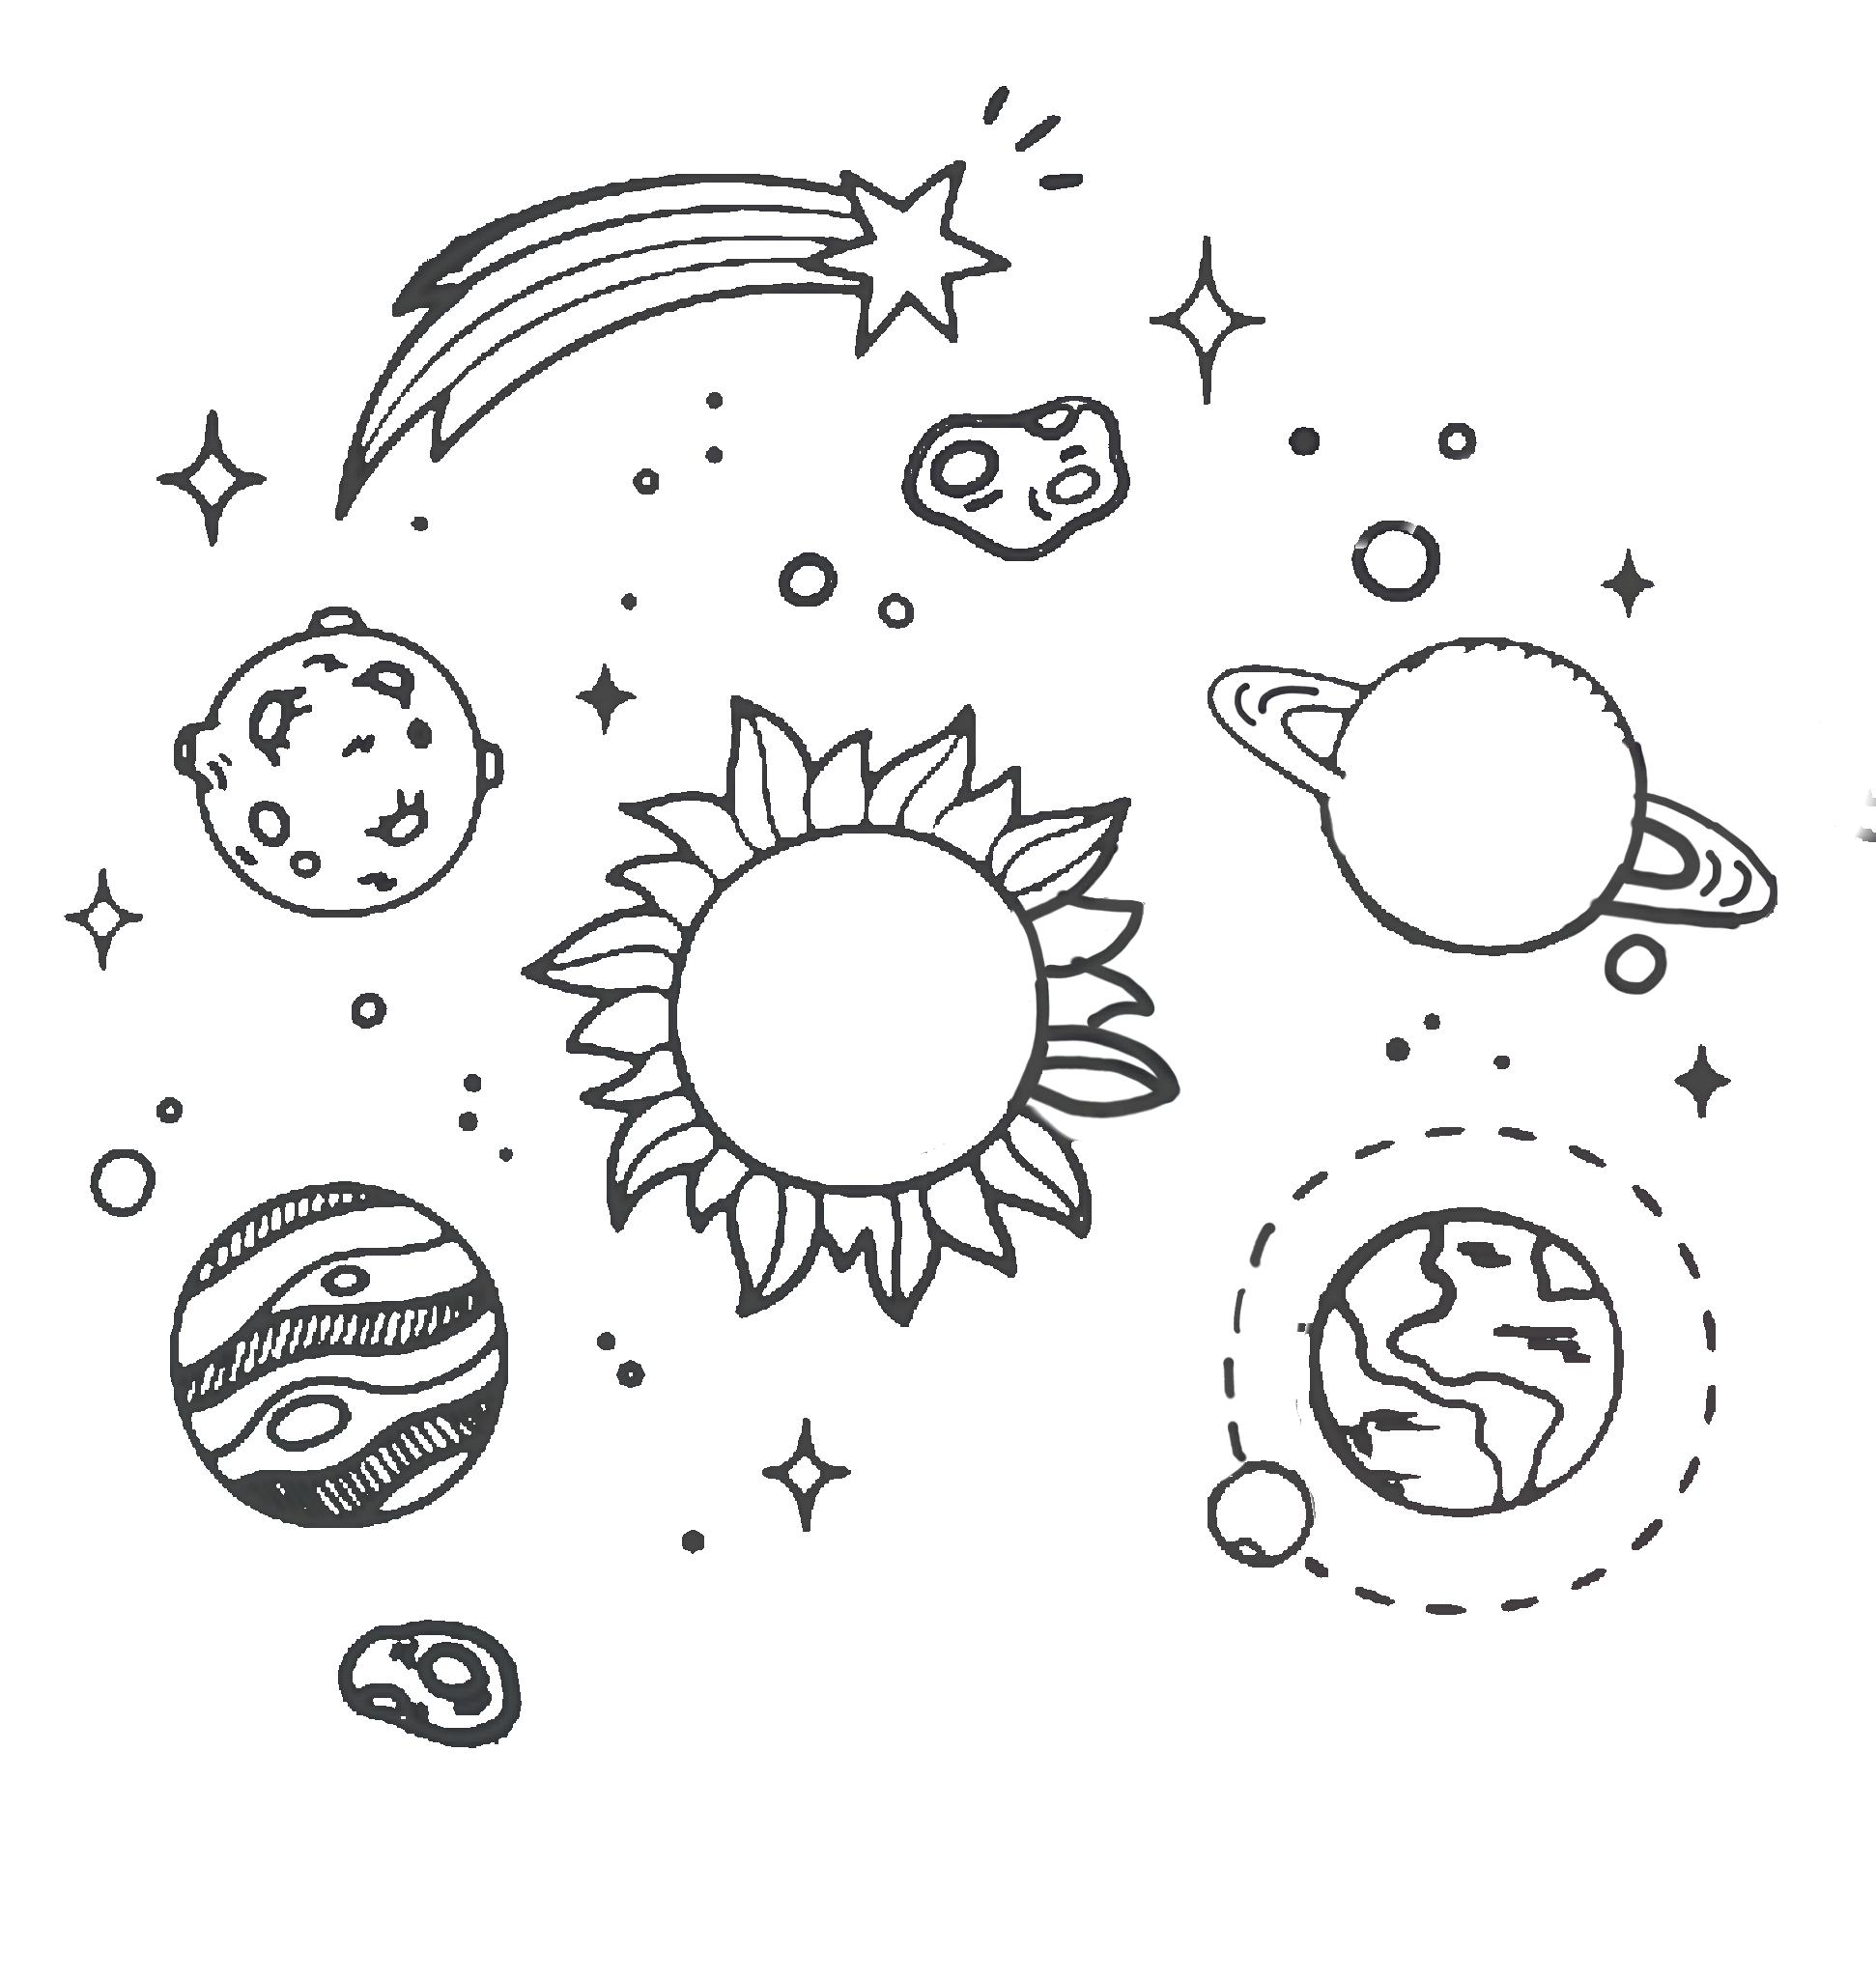 Space Drawing